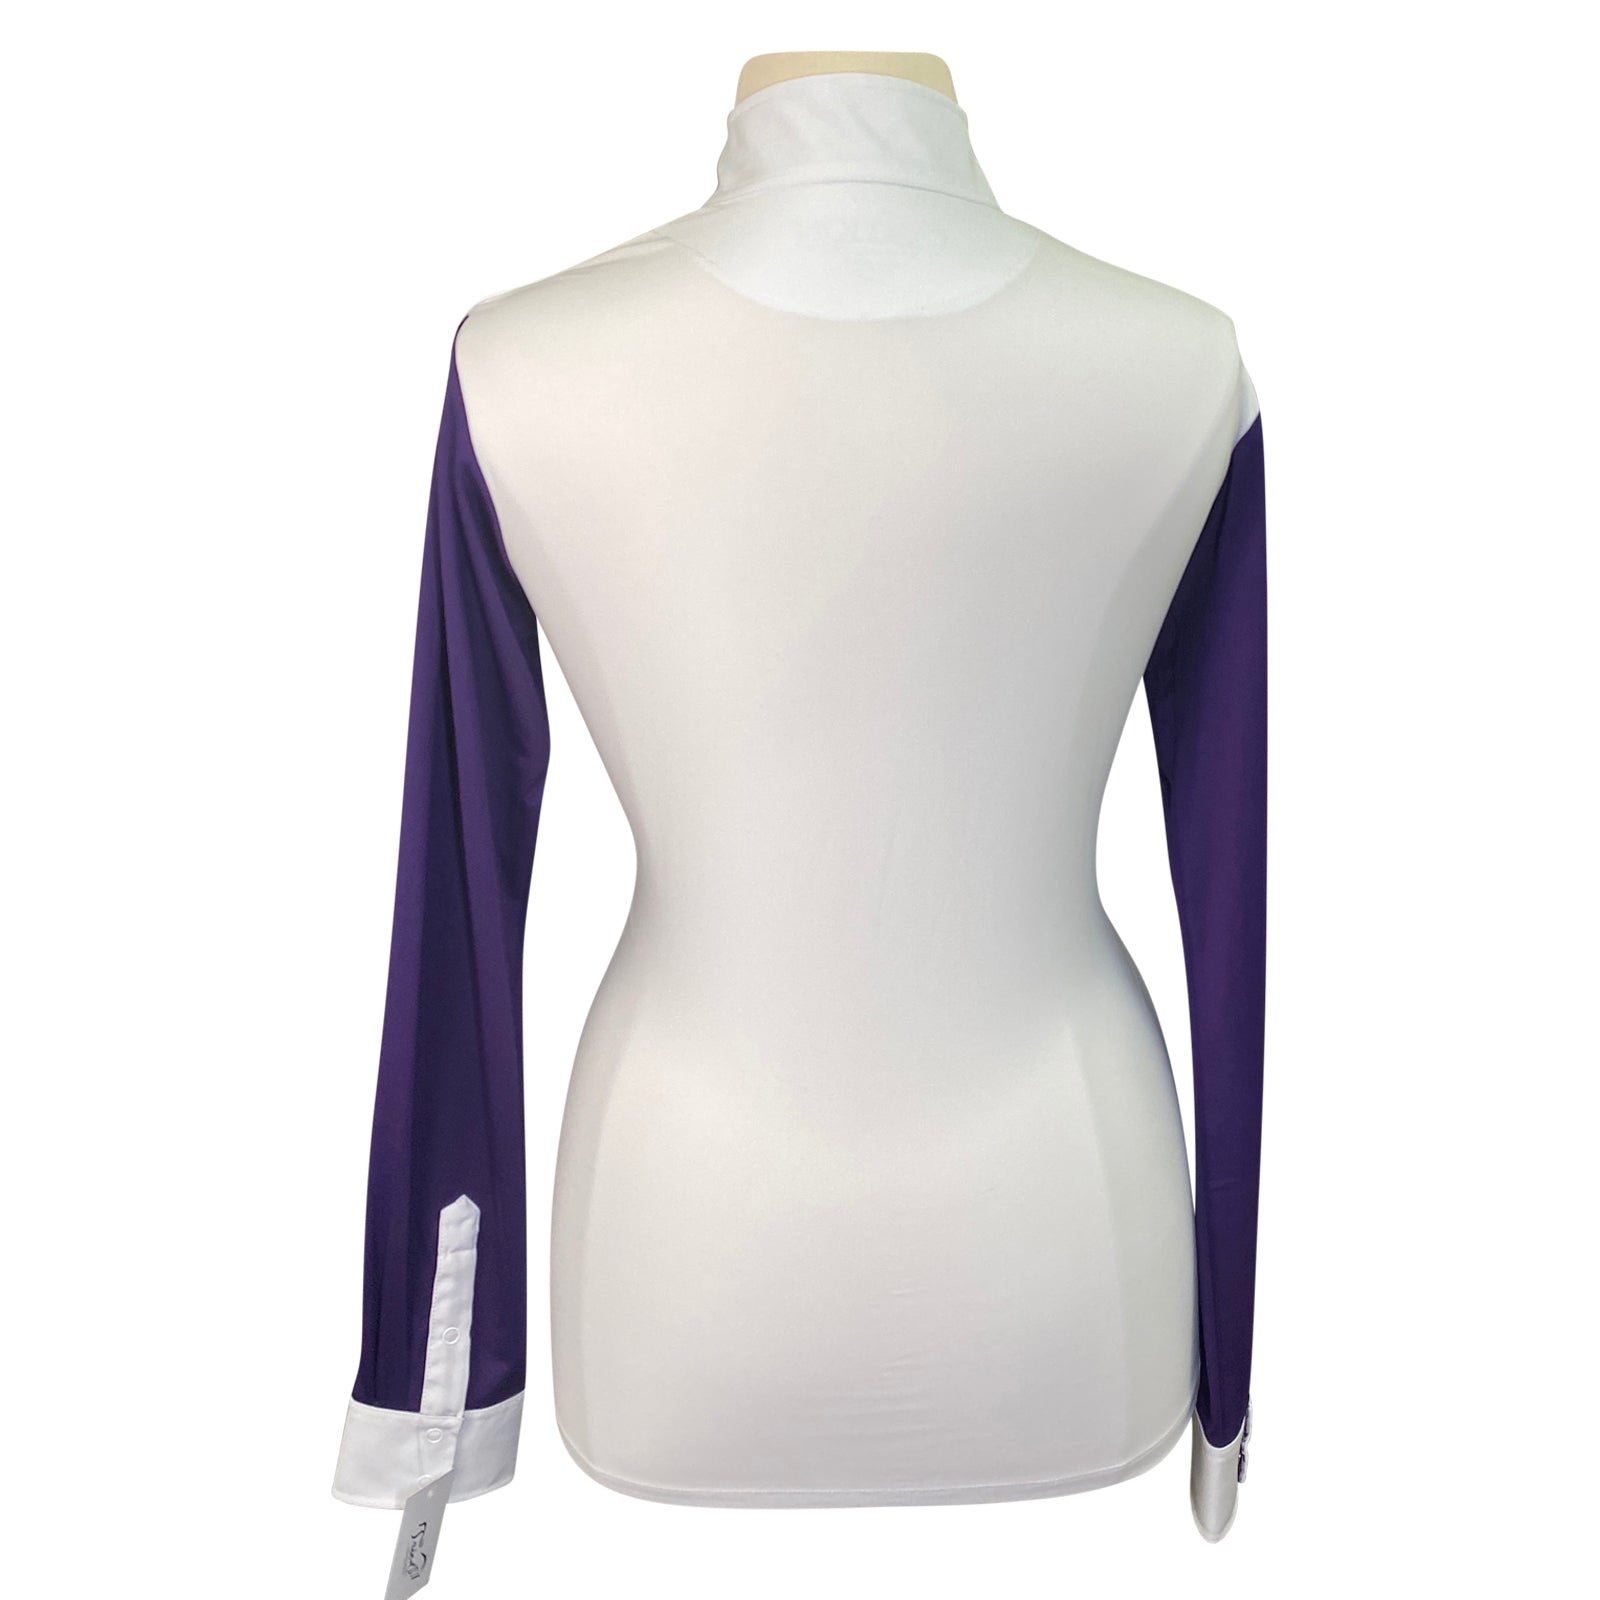 back of Ovation 'Belmont' Show Shirt in White/Grape